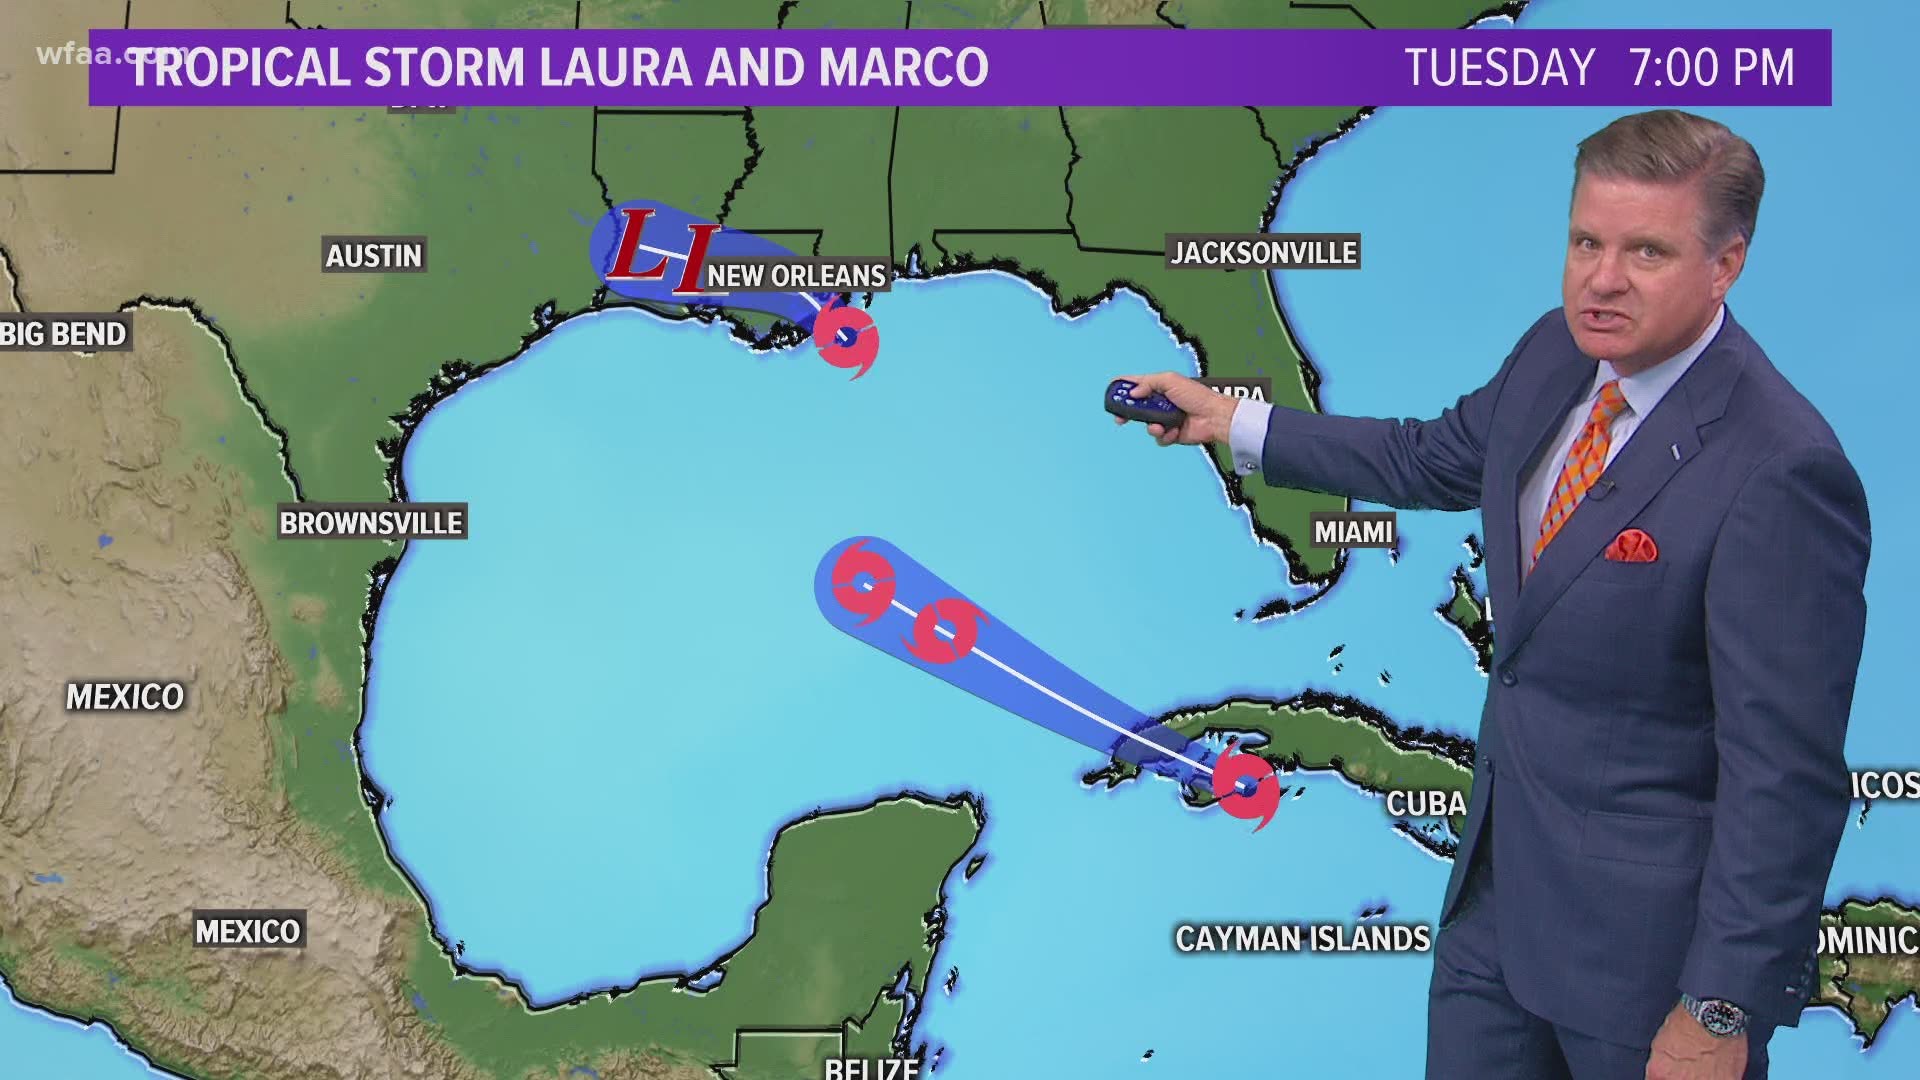 Tropical Storm Laura's path is still in limbo but some models show the Texas Coast could be impacted.